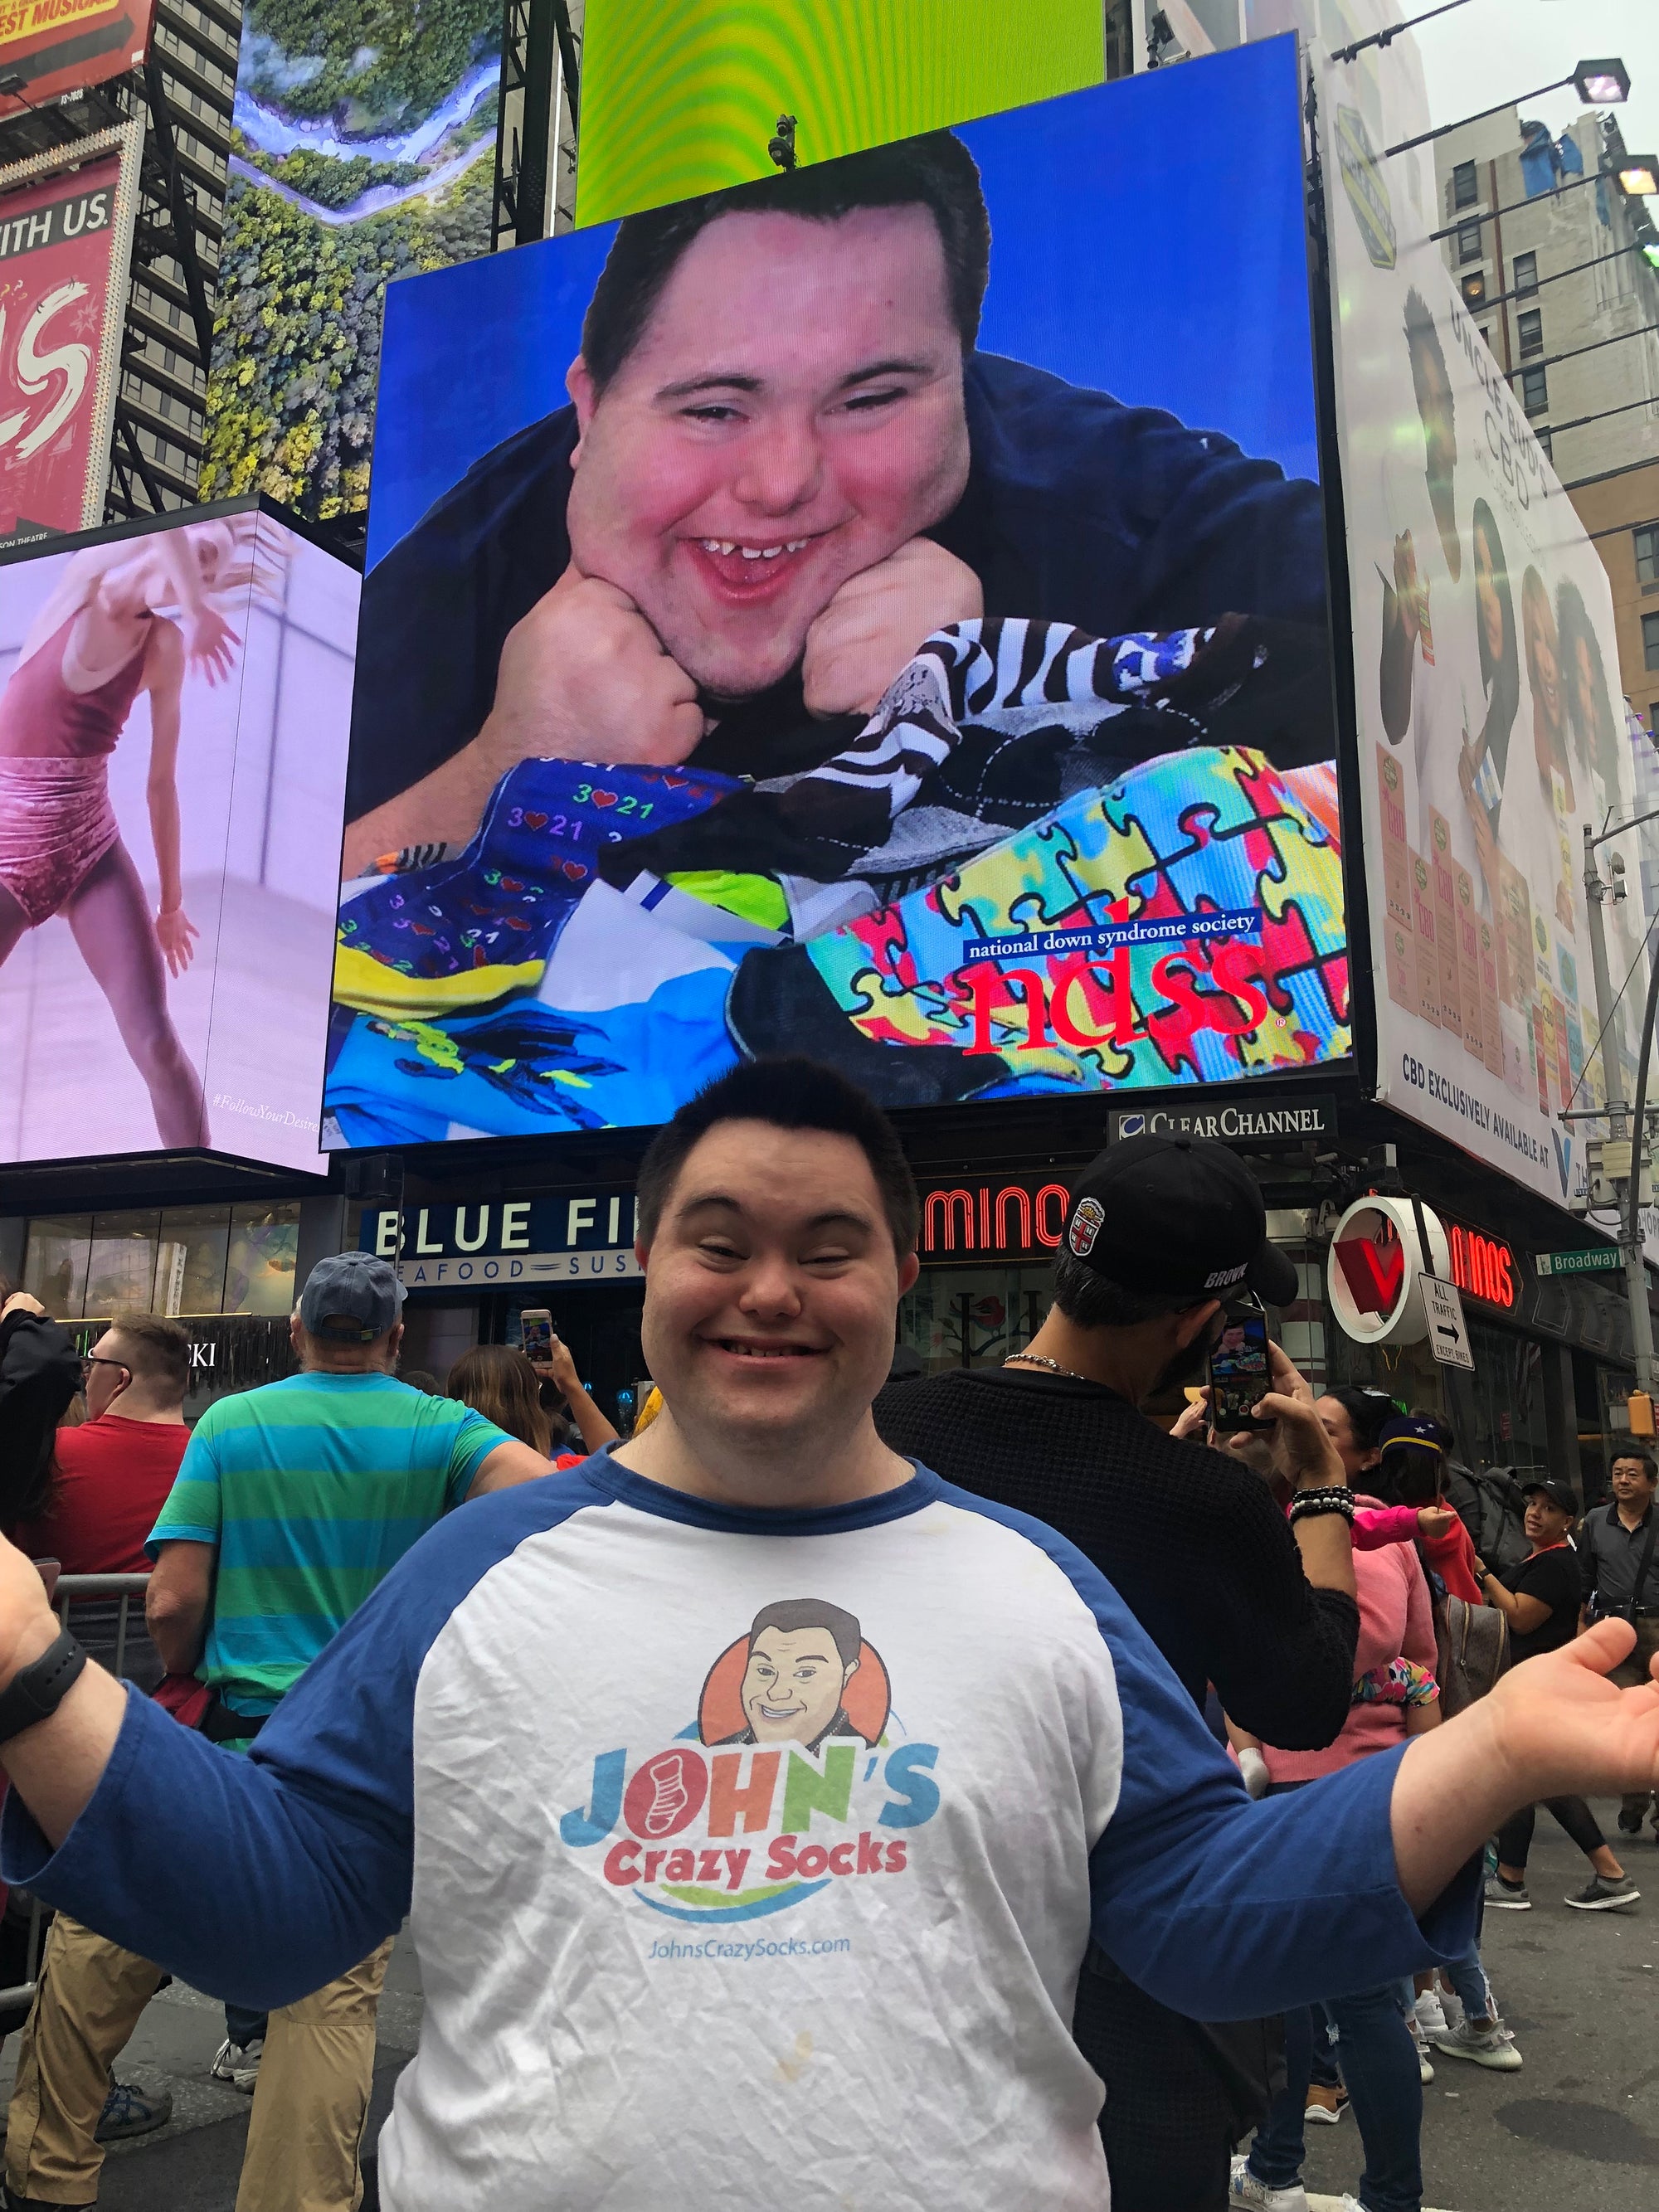 John Cronin, Co-Founder of John’s Crazy Socks, Will Be Featured in a Times Square Video